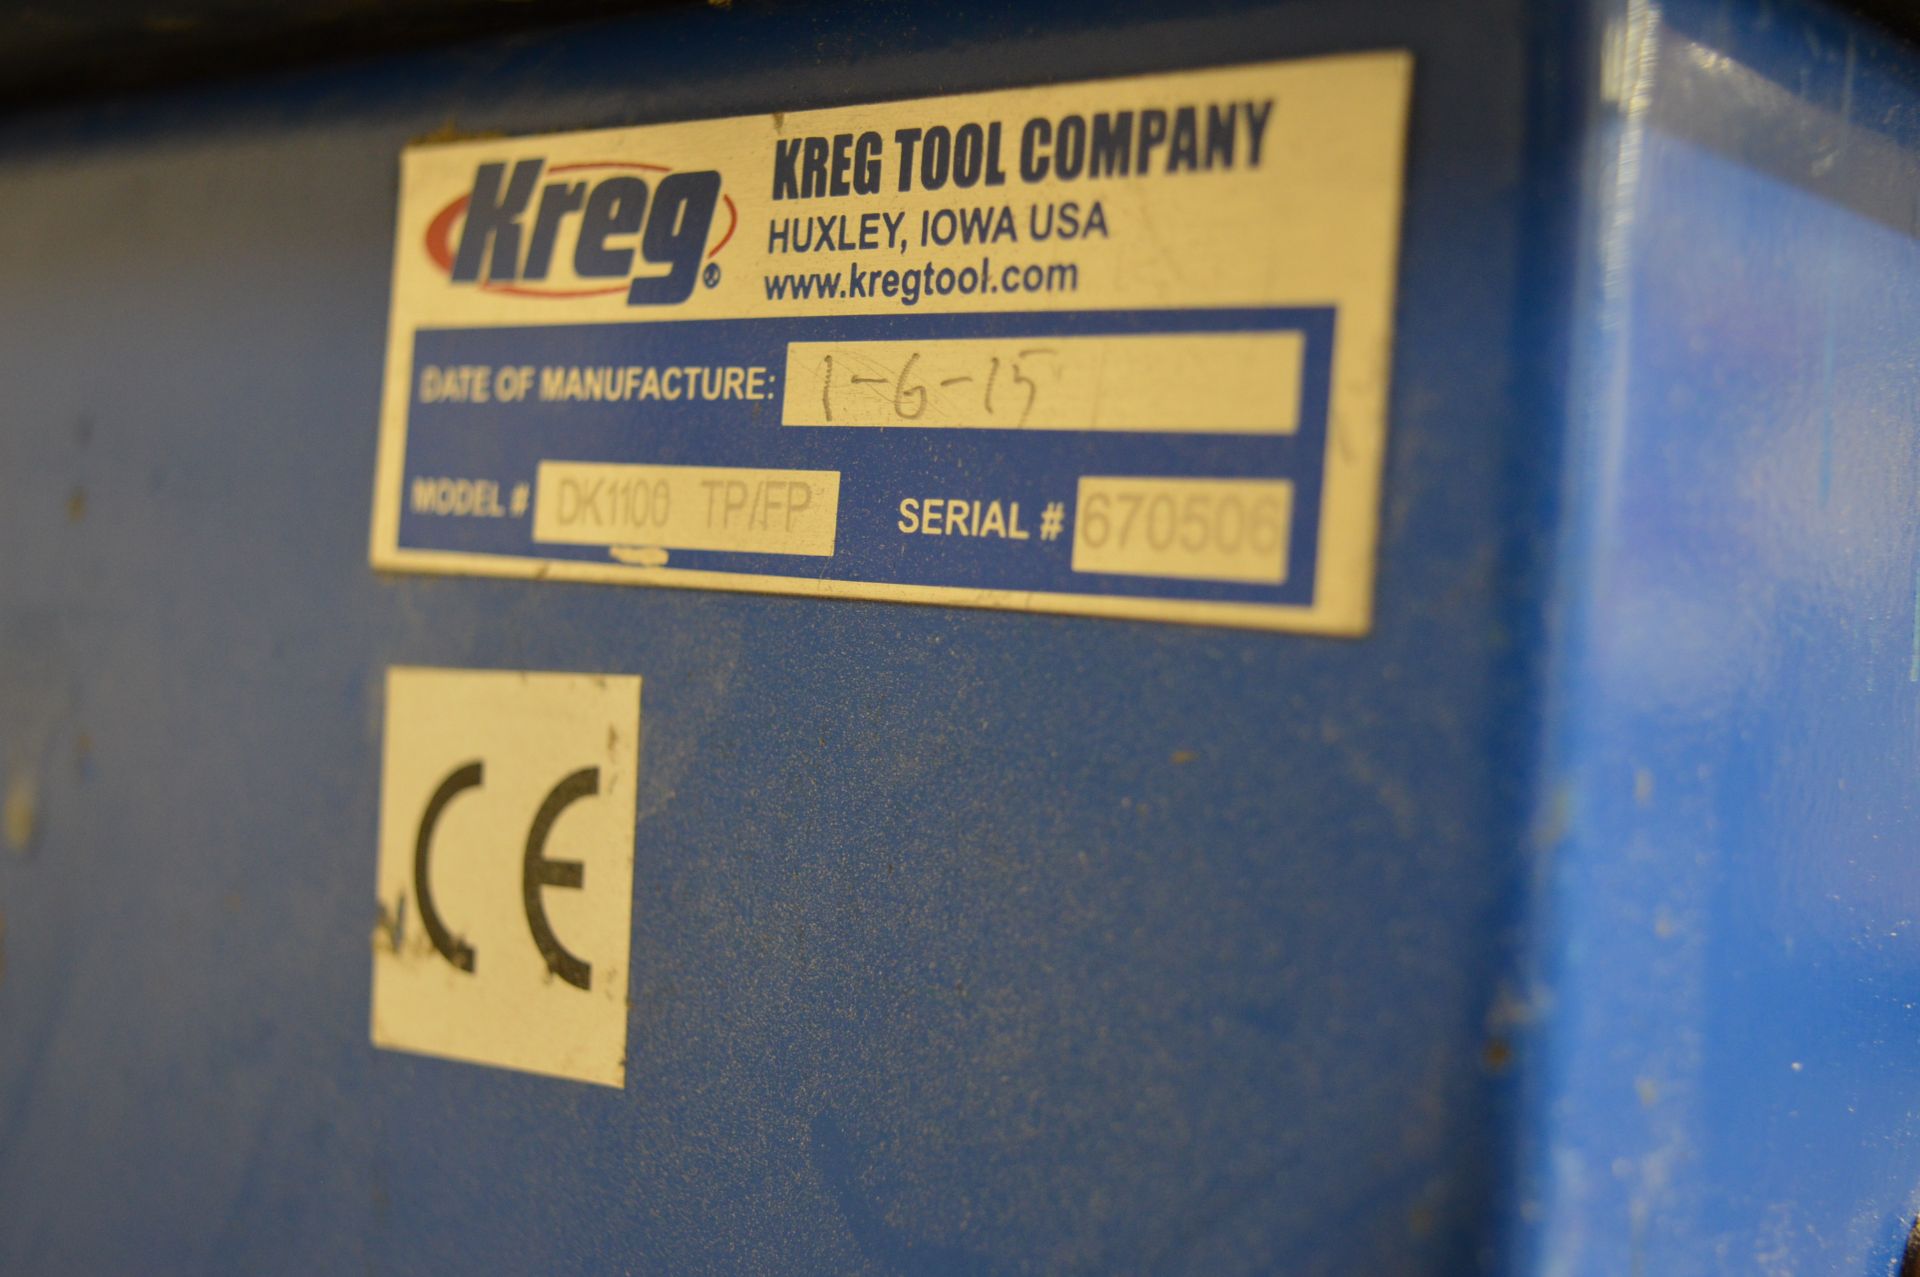 Kreg, DK1100 TP/FP bench mounted pocket hole drilling machine, Serial No. 670506 (2015) (Location: - Image 2 of 4